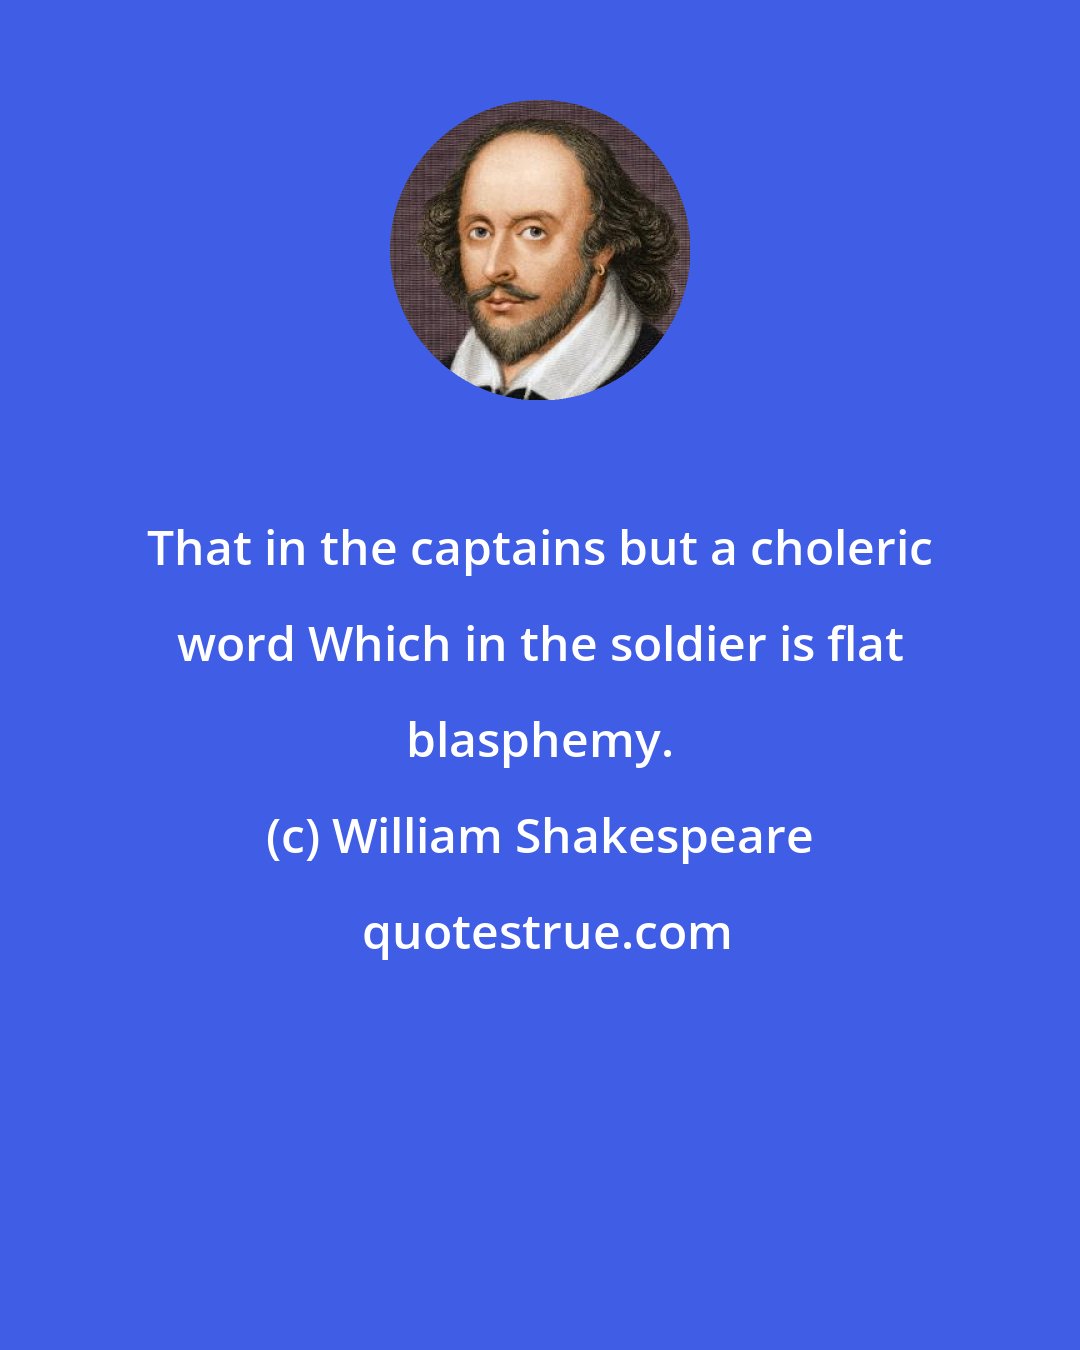 William Shakespeare: That in the captains but a choleric word Which in the soldier is flat blasphemy.